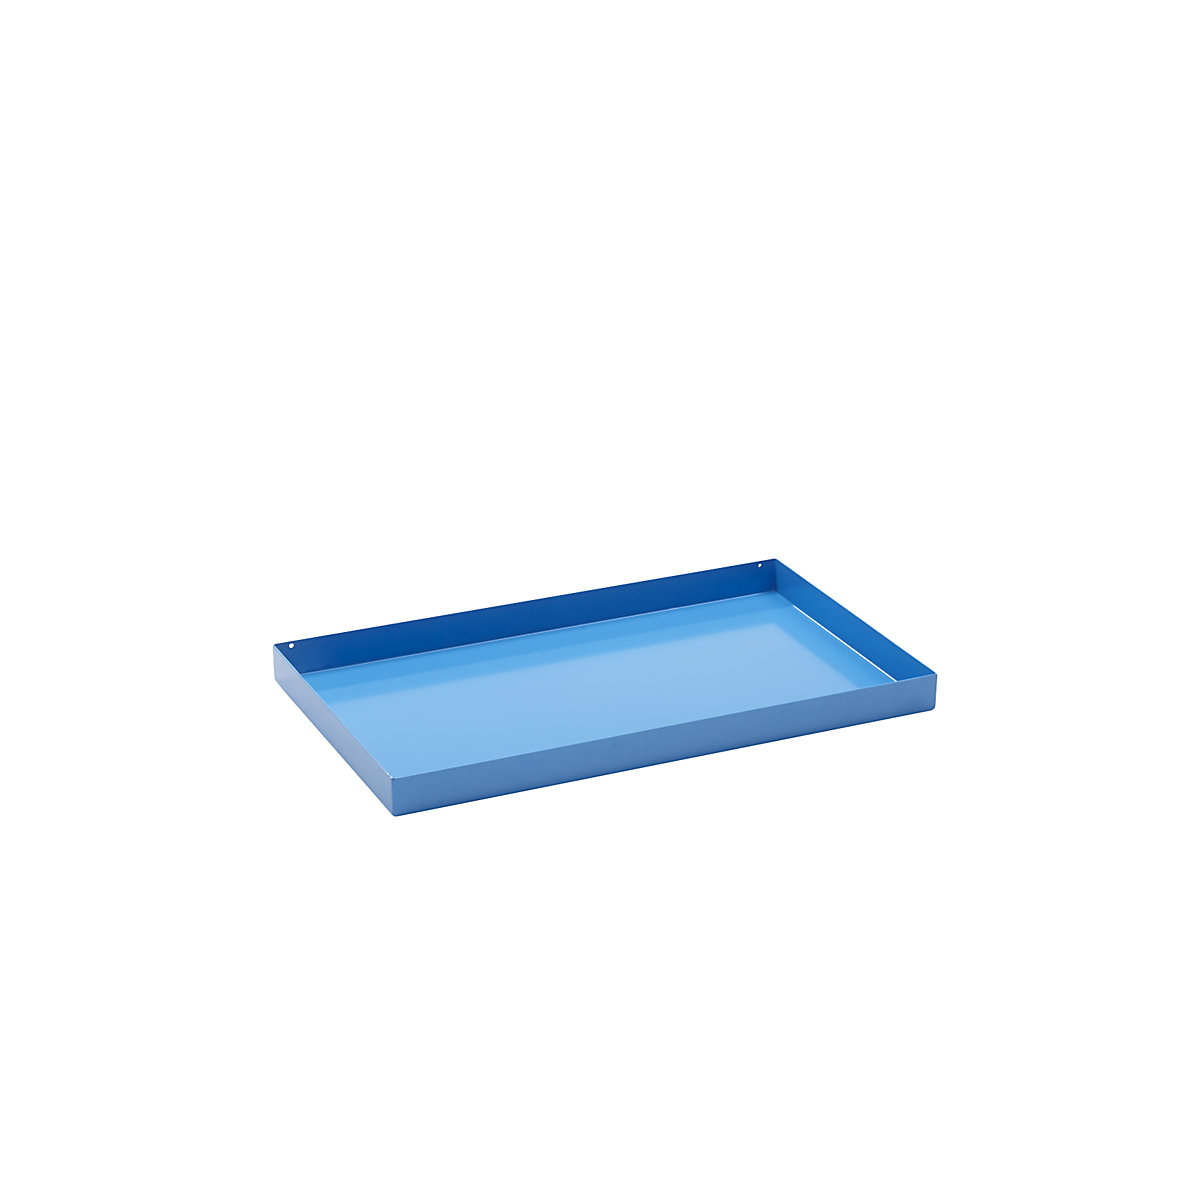 Steel sump tray for small containers – eurokraft basic